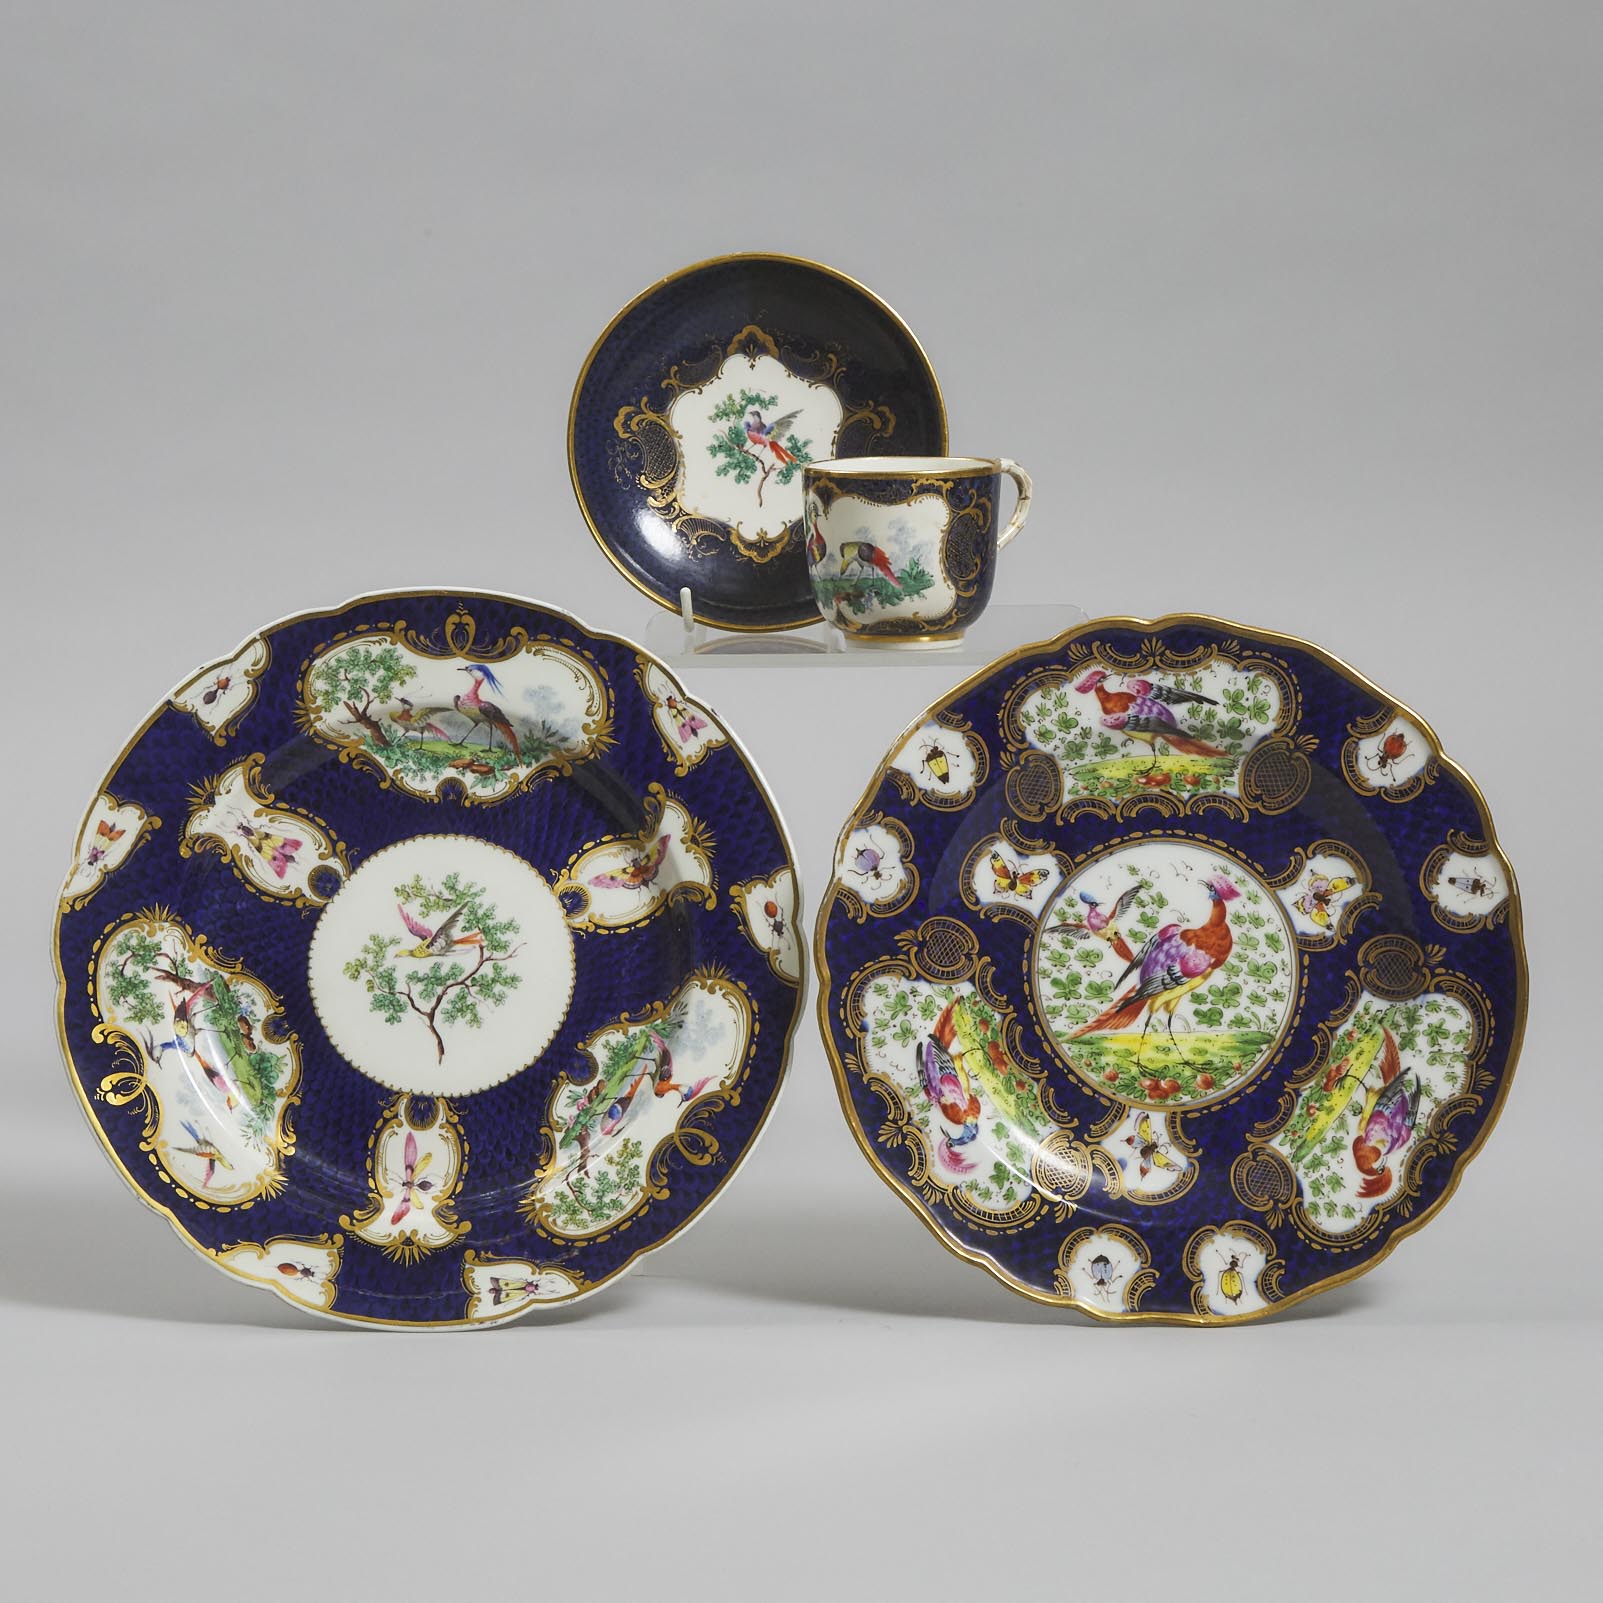 Two Samson 'Worcester' Scale Blue Ground Exotic Bird Plates and a Cup and Saucer, c.1900